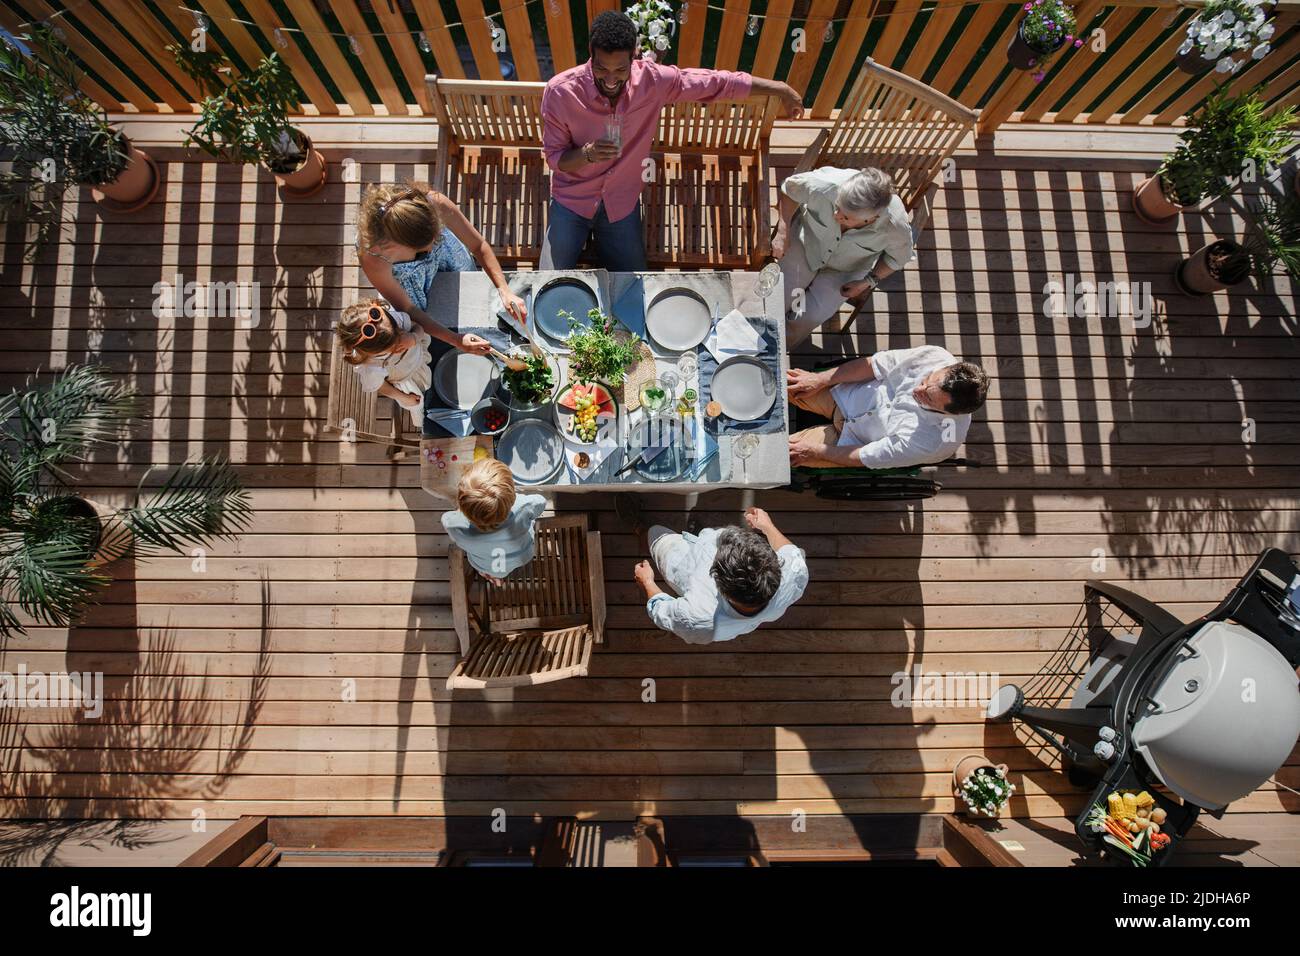 Top view of 3 generations family eating at barbecue party dinner on patio, people sitting at table on patio with grill. Stock Photo